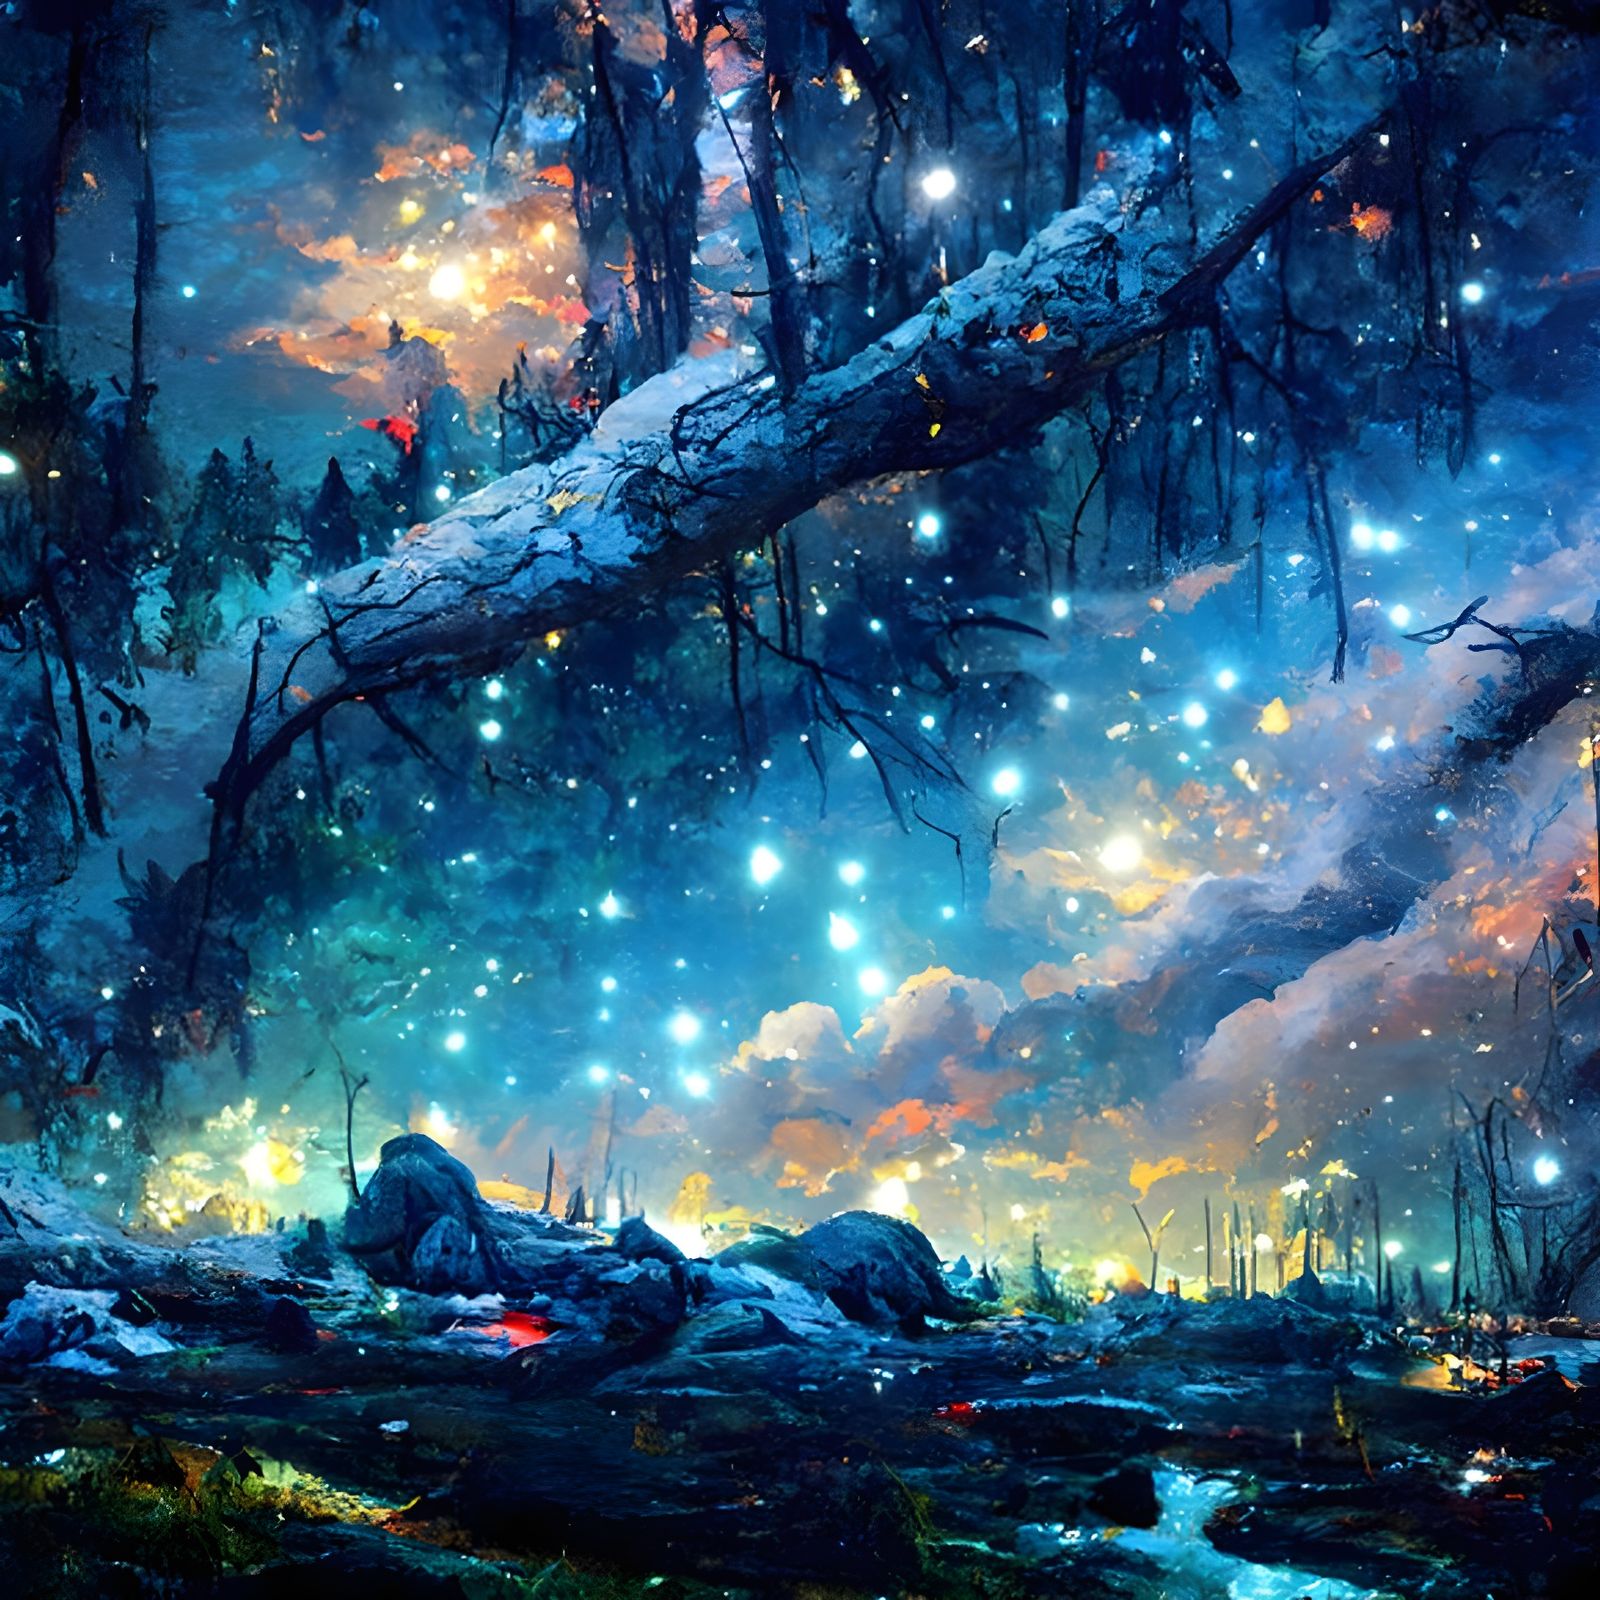 Forests in the stars